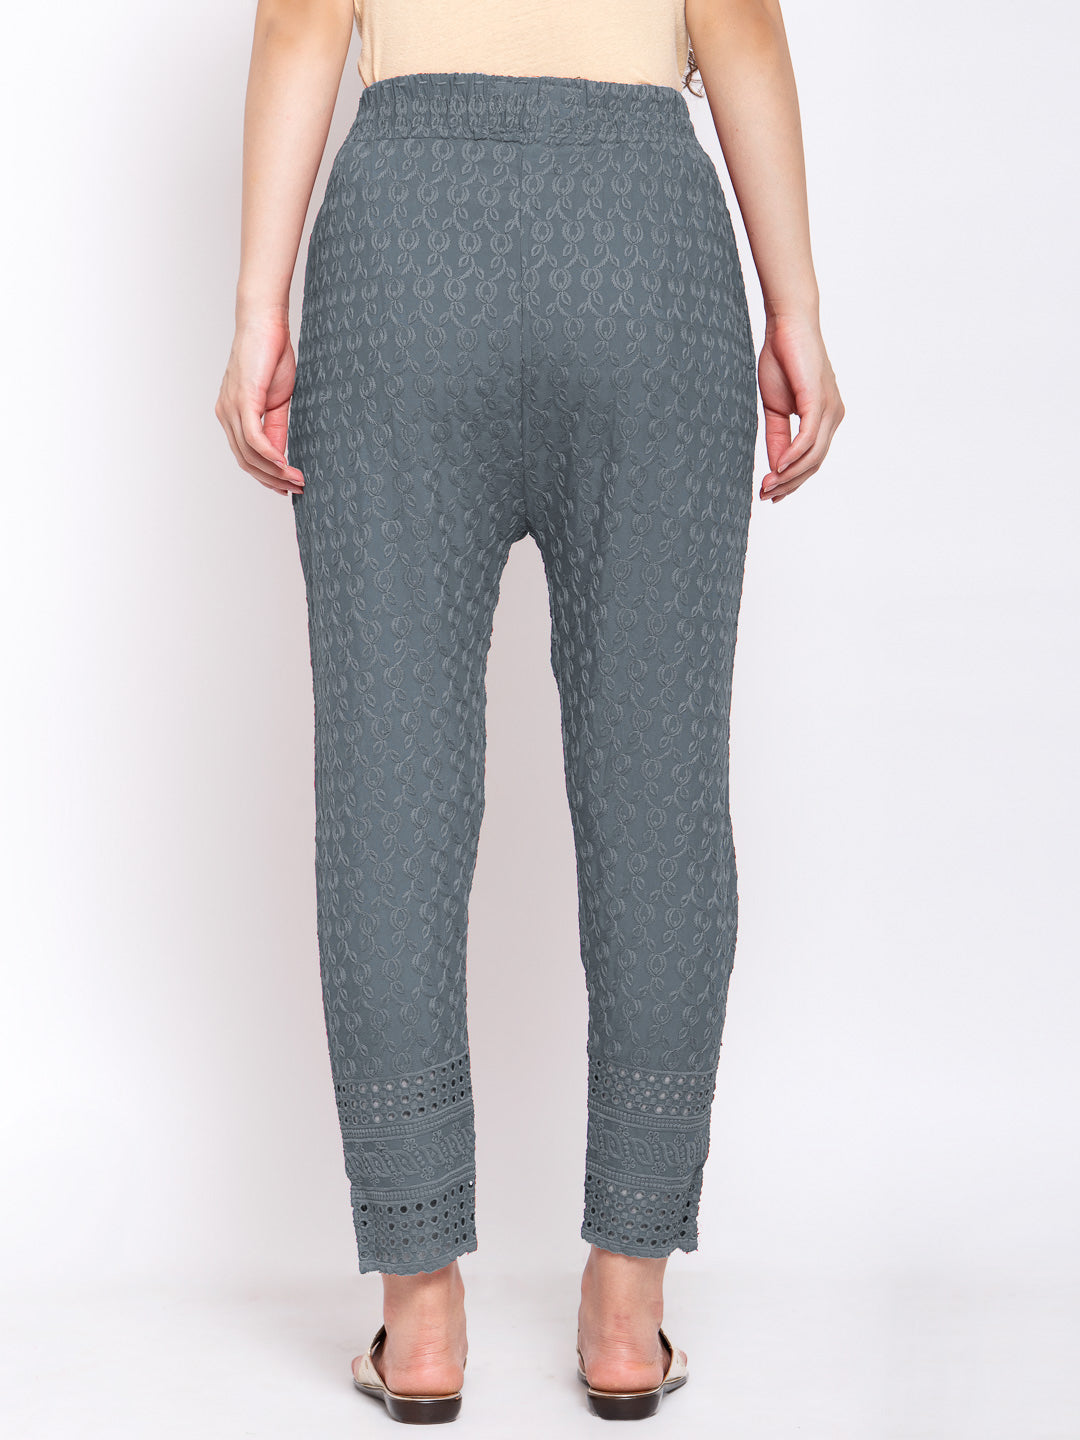 KLOTTHE Grey Cotton Embroidered Trouser